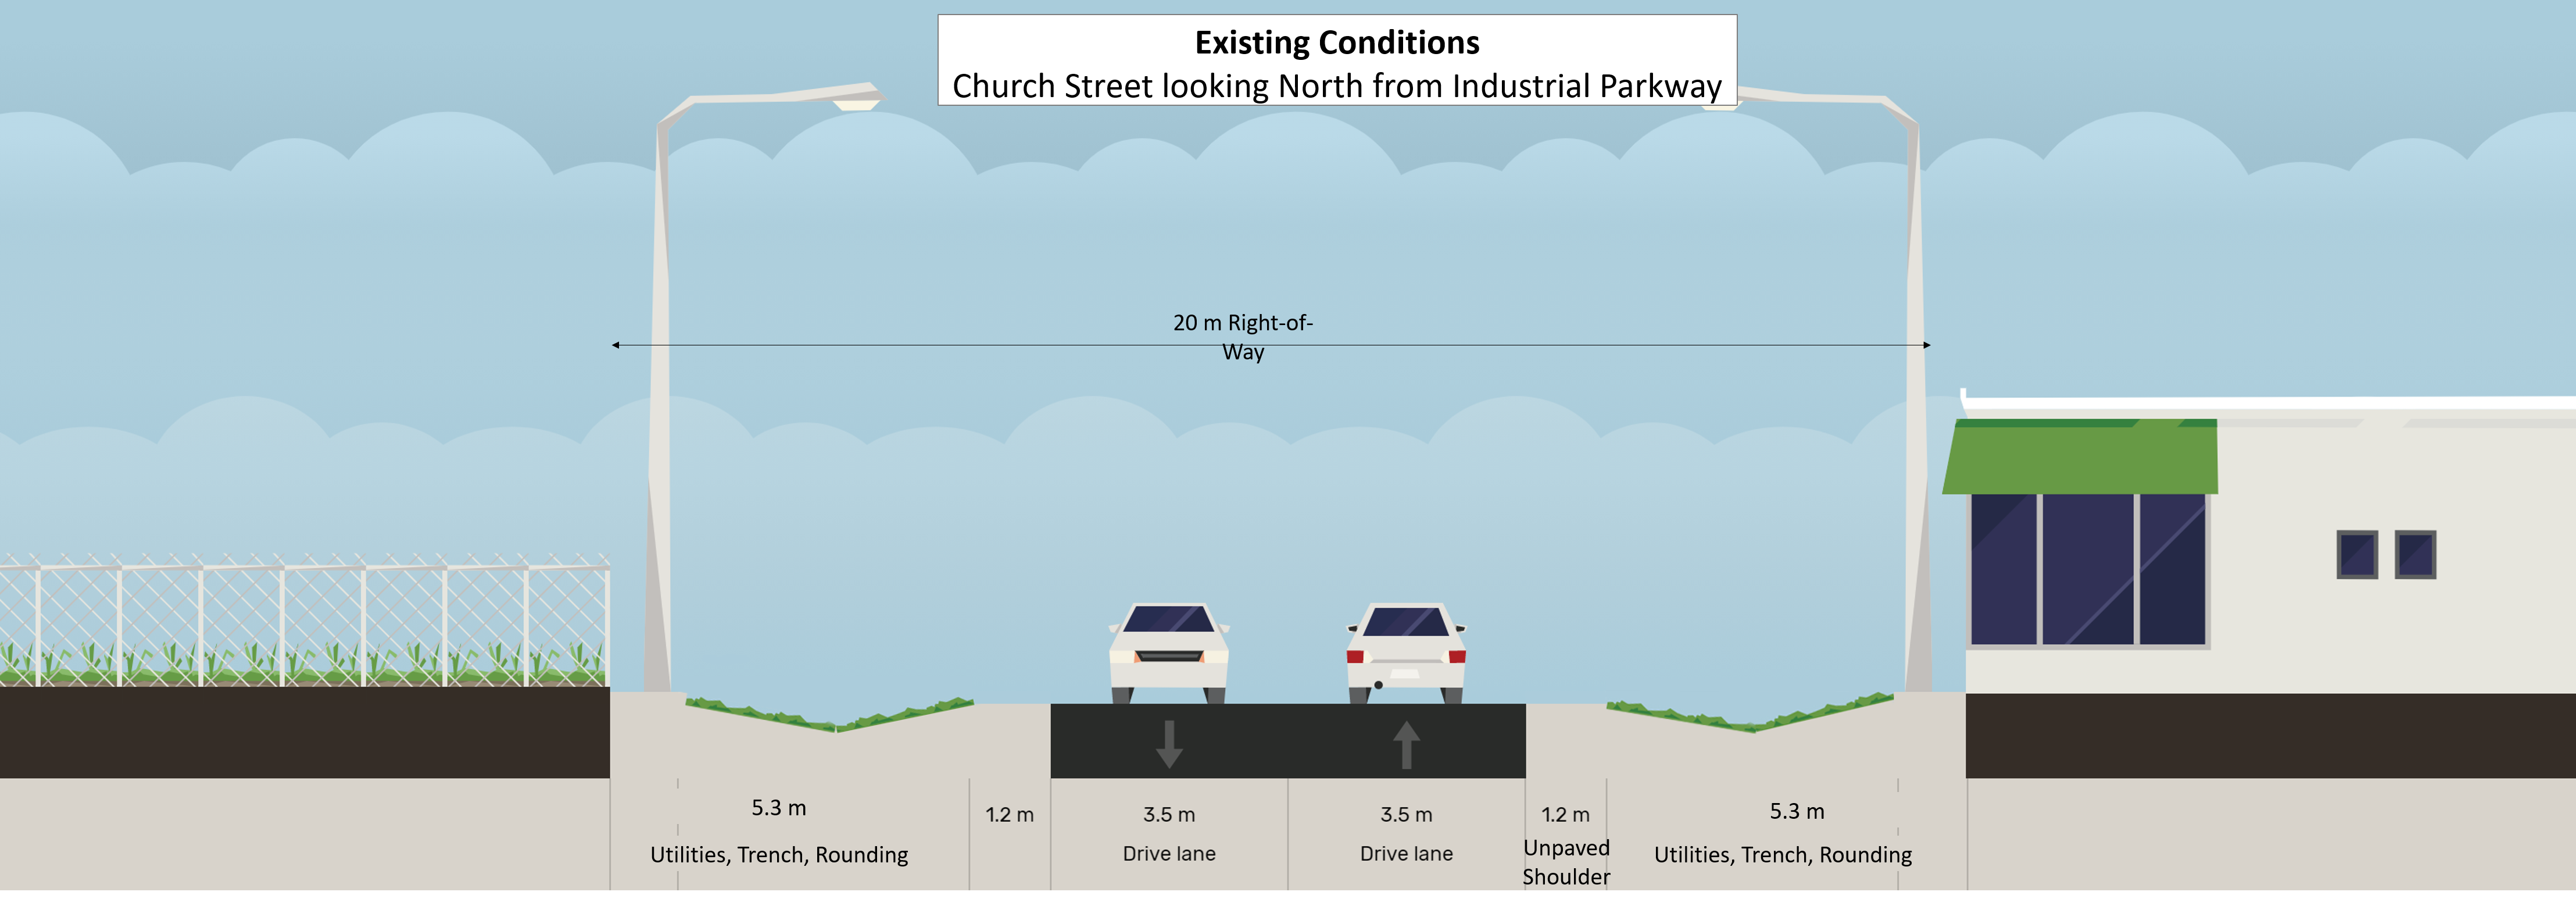 This is an image of a cross section showing Option 1: Paved Shoulders. It has a 20-meter Right of Way. It has two vehicle lanes, one in each direction, that are 3.5-meters wide. On both sides, there are paved shoulders that are 1.2-meters wide, and a 5.3-meter boulevard containing utilities and a trench.